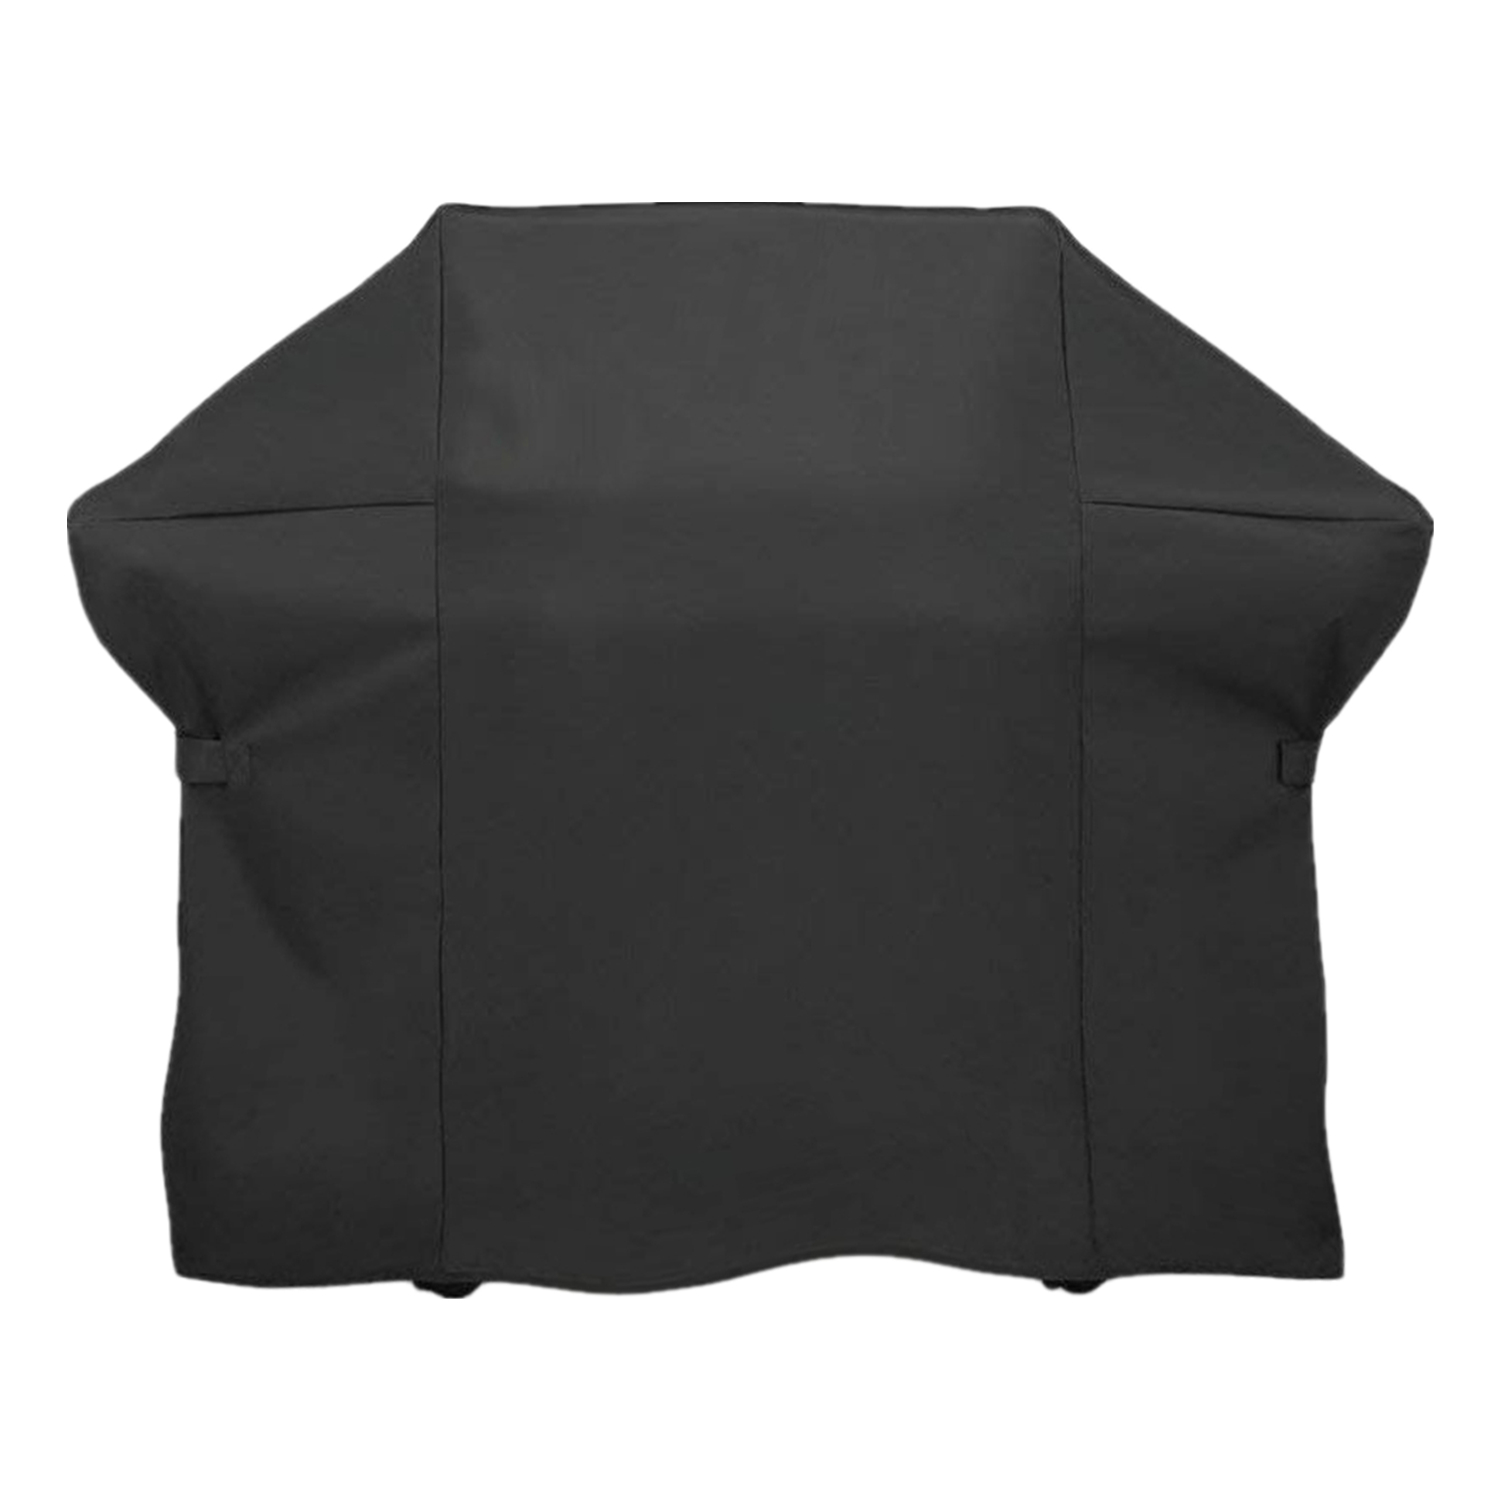 Gas Grill Cover Heavy Duty Waterproof Replacement for Weber 7109 - 74.8 inch L x 26.8 inch W x 47 inch H - image 1 of 6